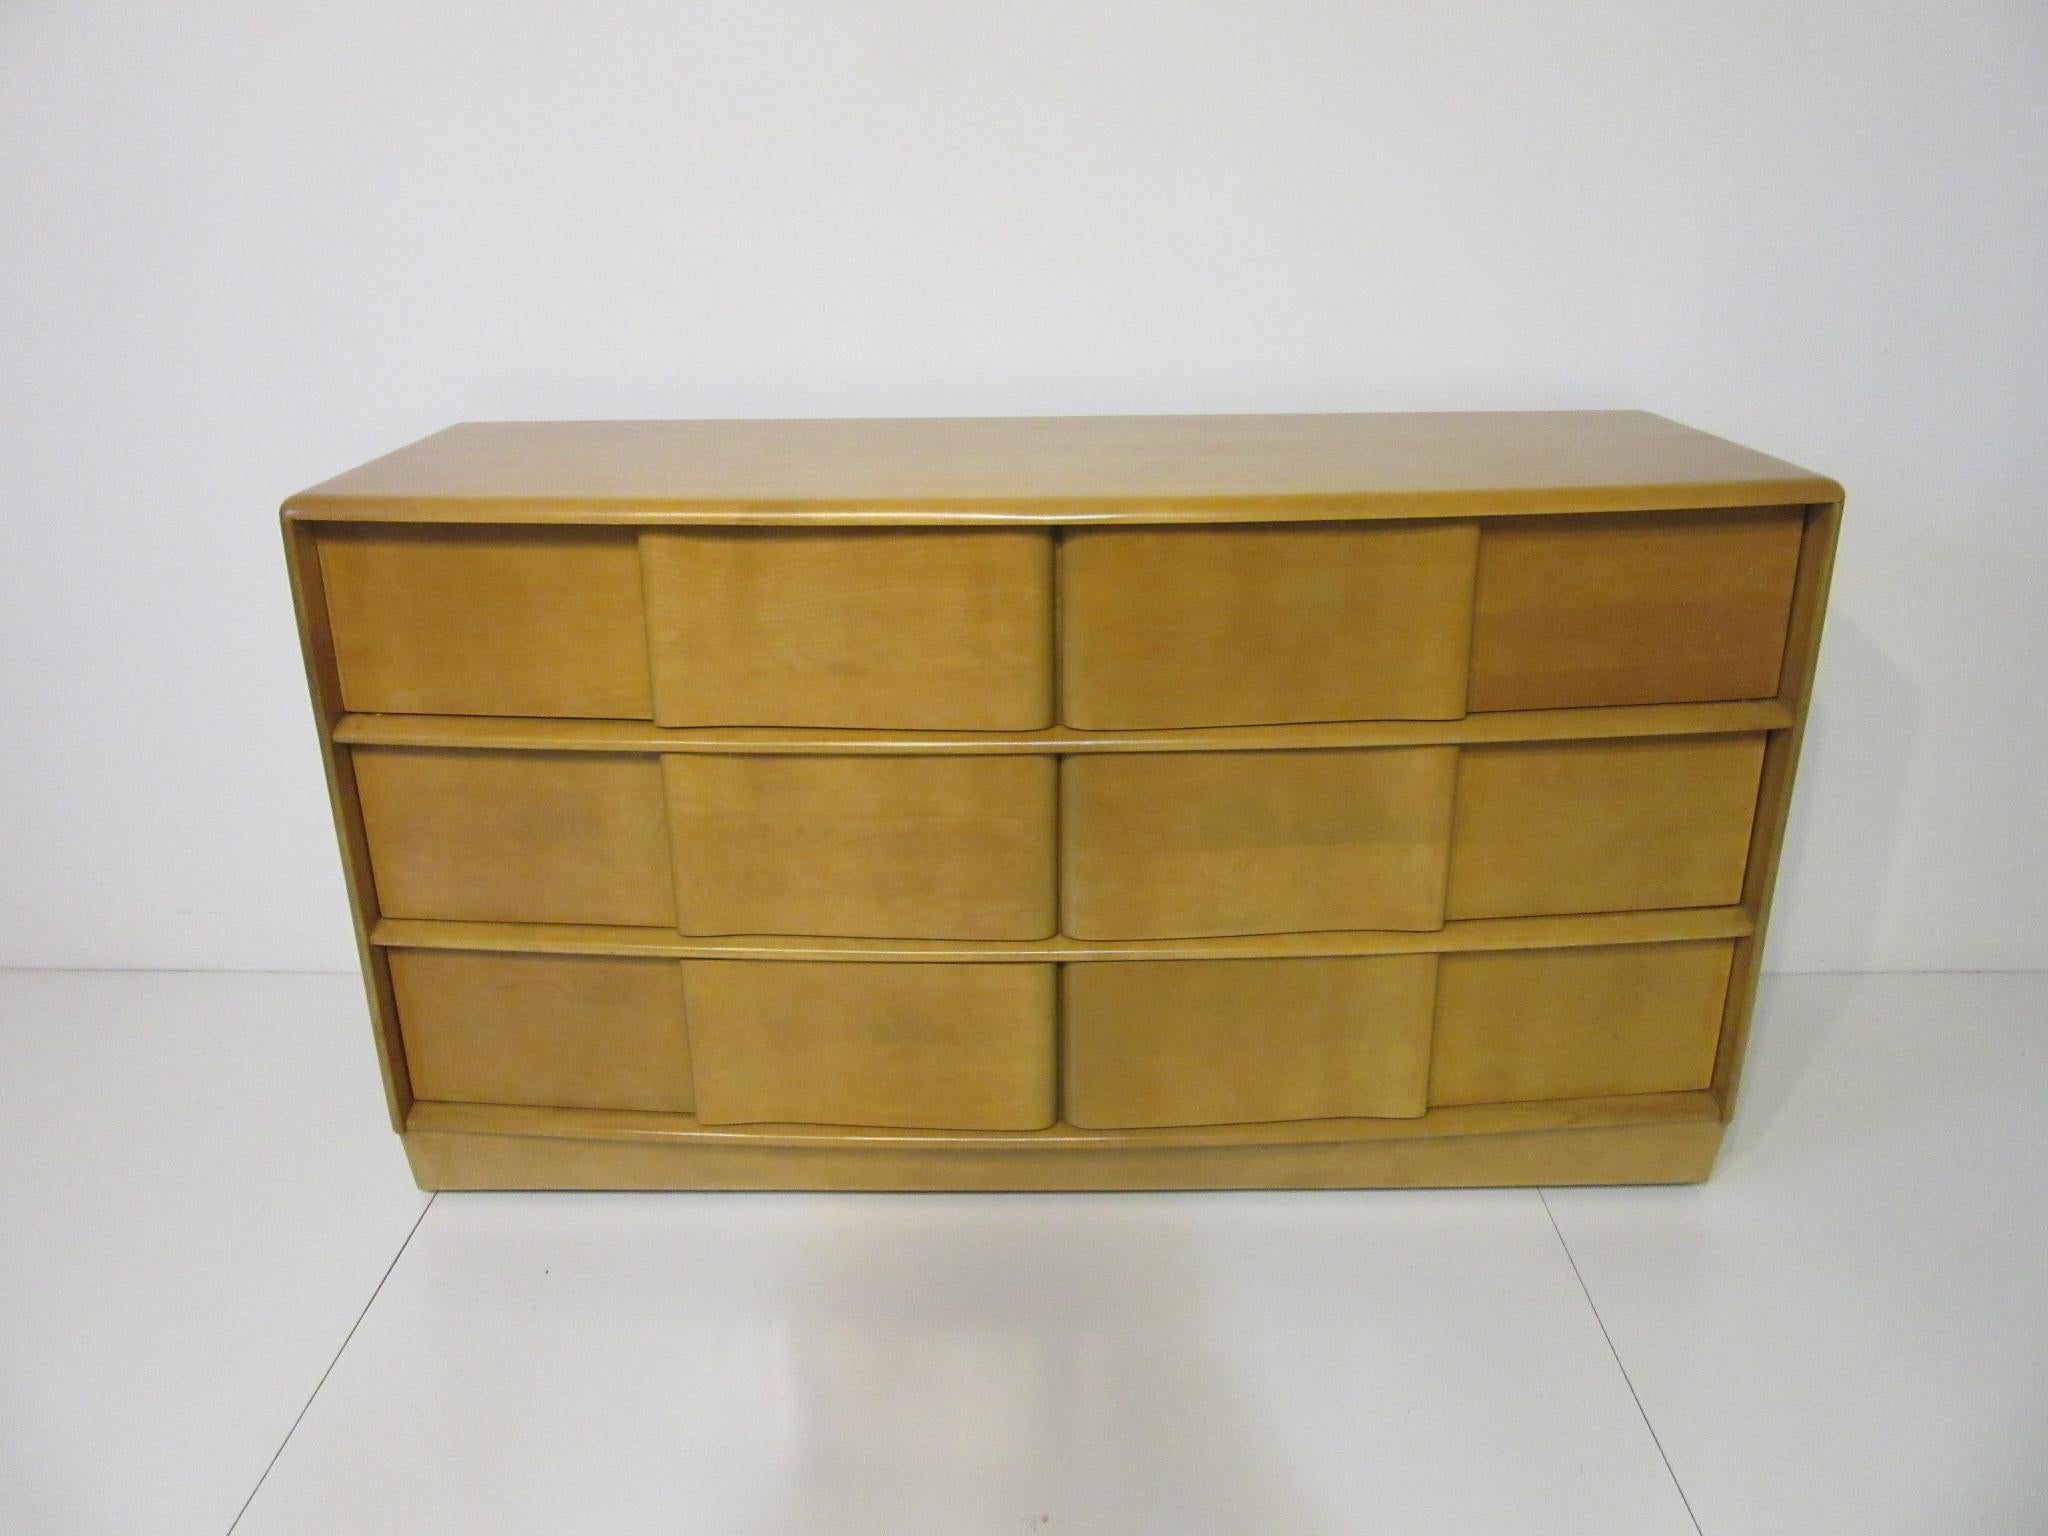 A larger sculptural front six-drawer solid wood dresser in a wheat tone finish with wheels and plenty of storage, this restored piece is from the Sculptura collection manufactured by the Heywood-Wakefield Furniture company.